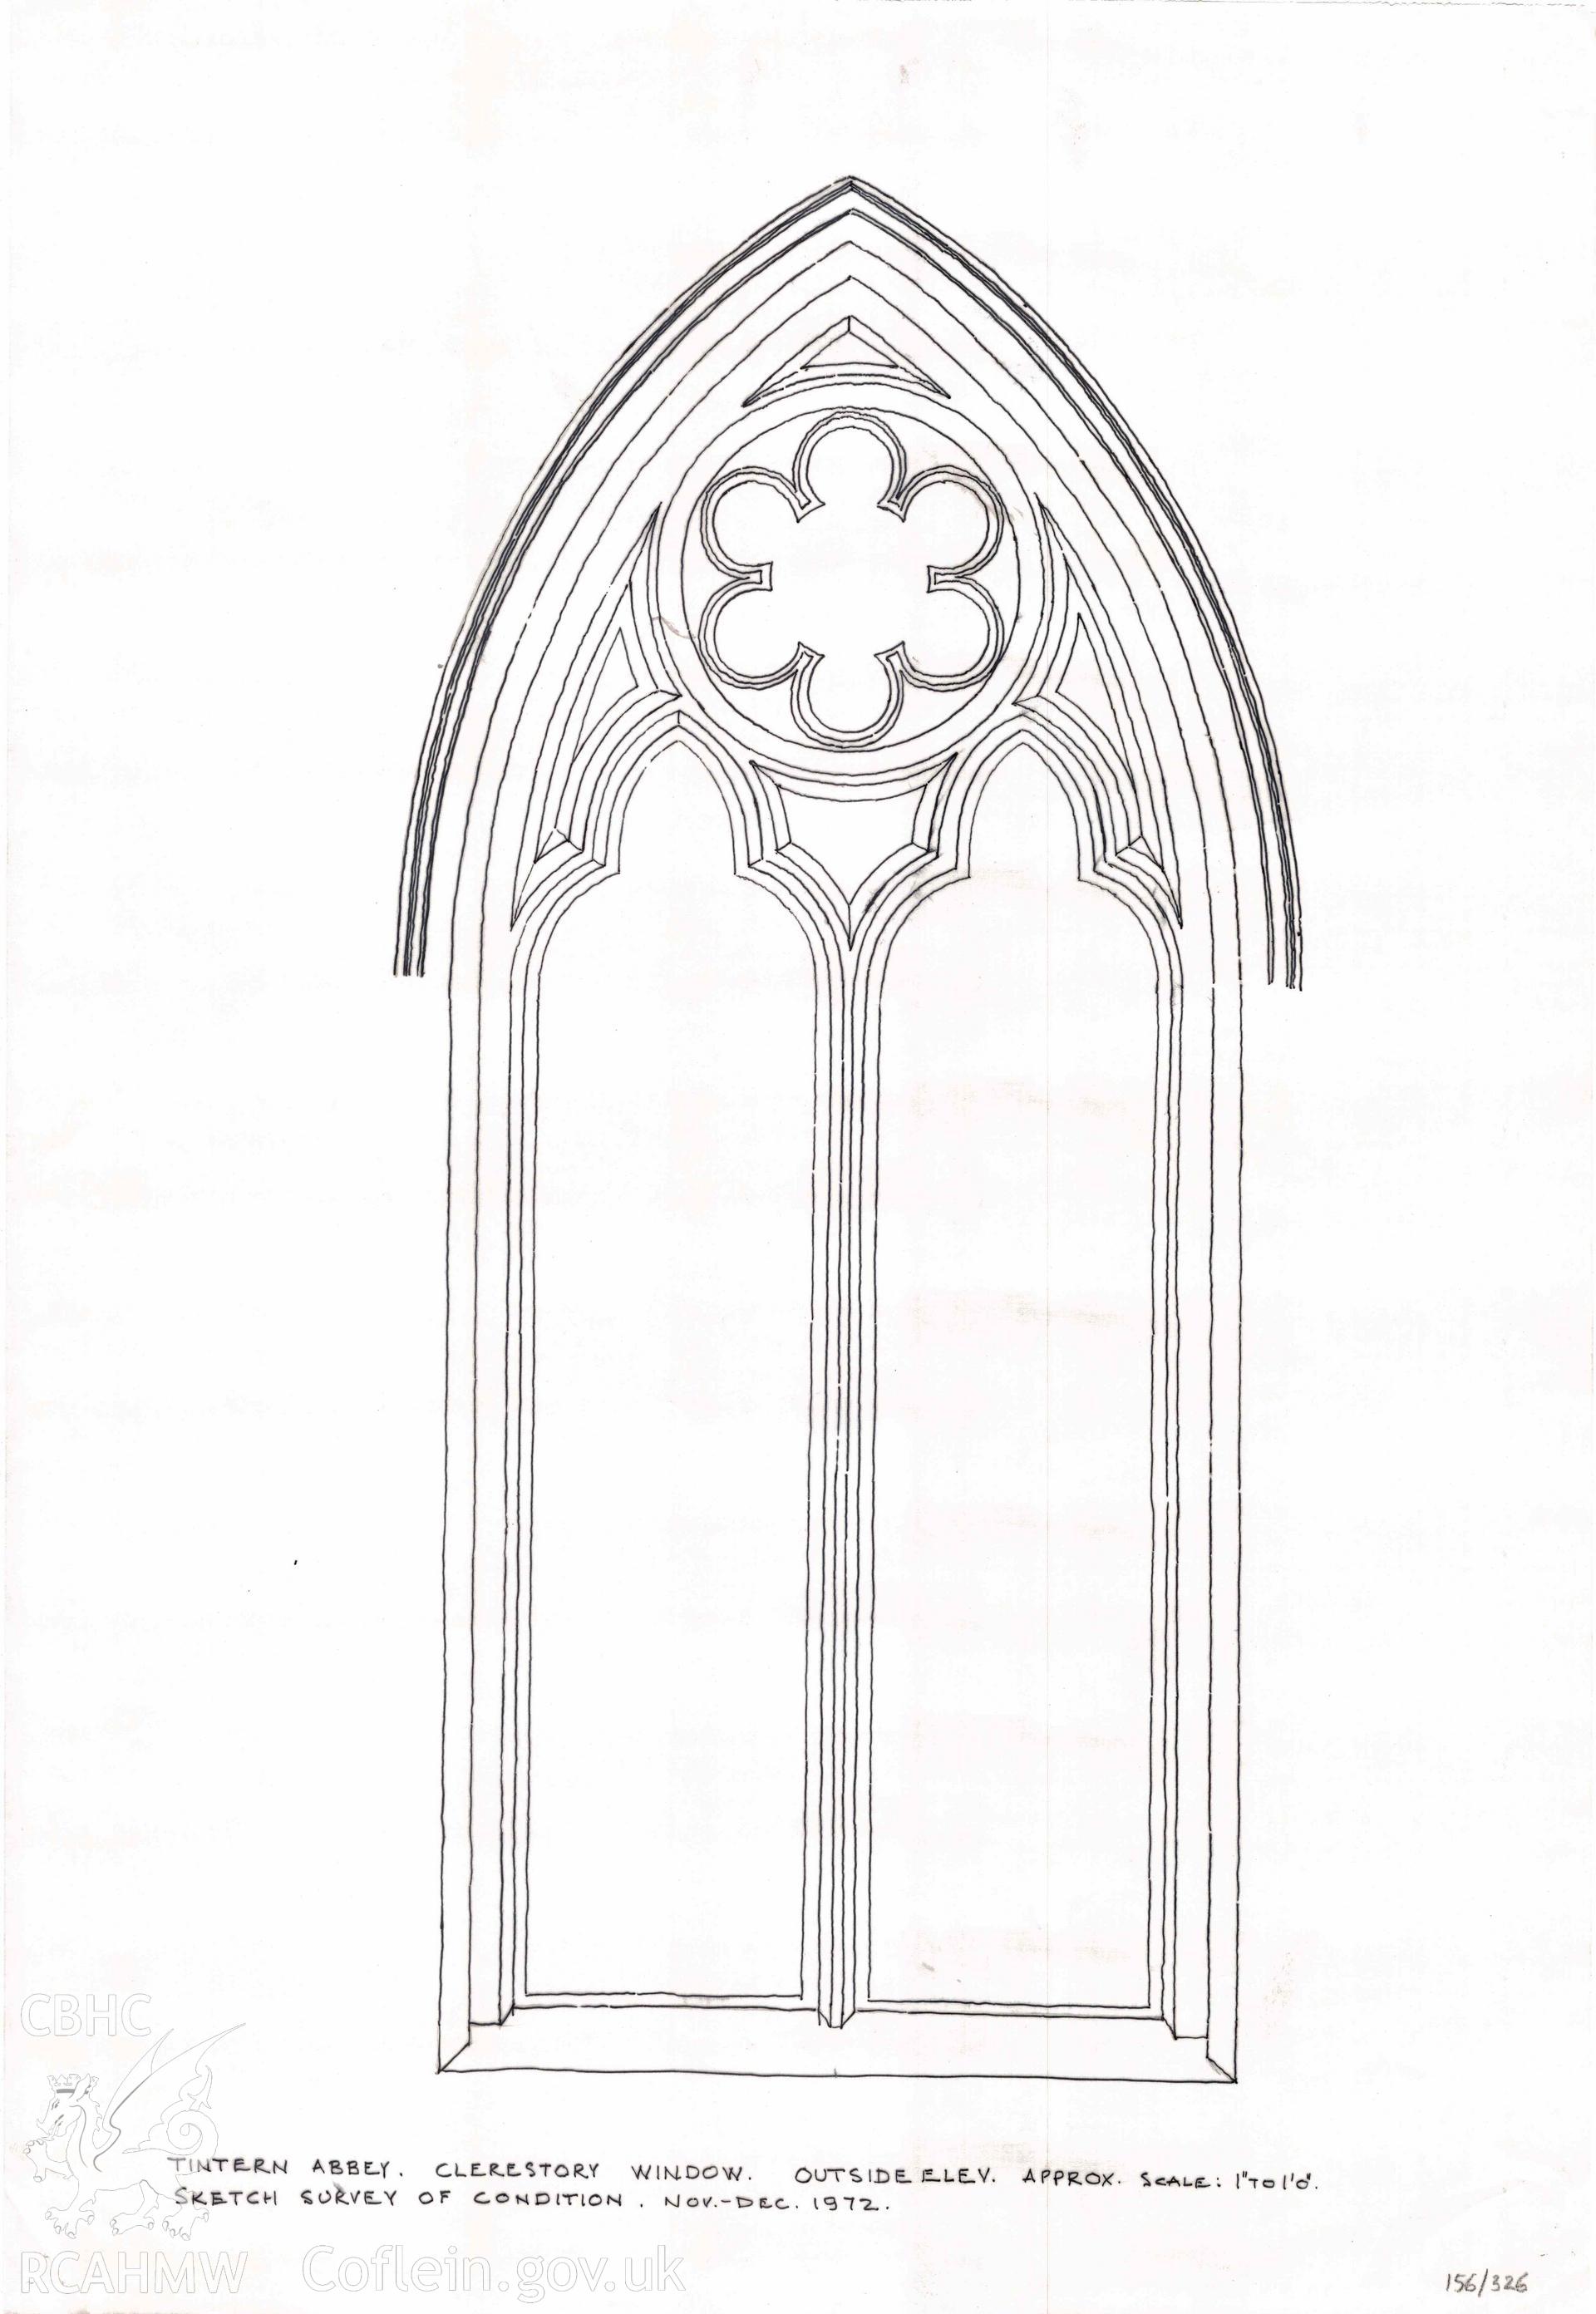 Cadw guardianship monument drawing, clerestory window, outside elevation, sketch survey of condition, Tintern Abbey.  Dated Nov-Dec 1972.